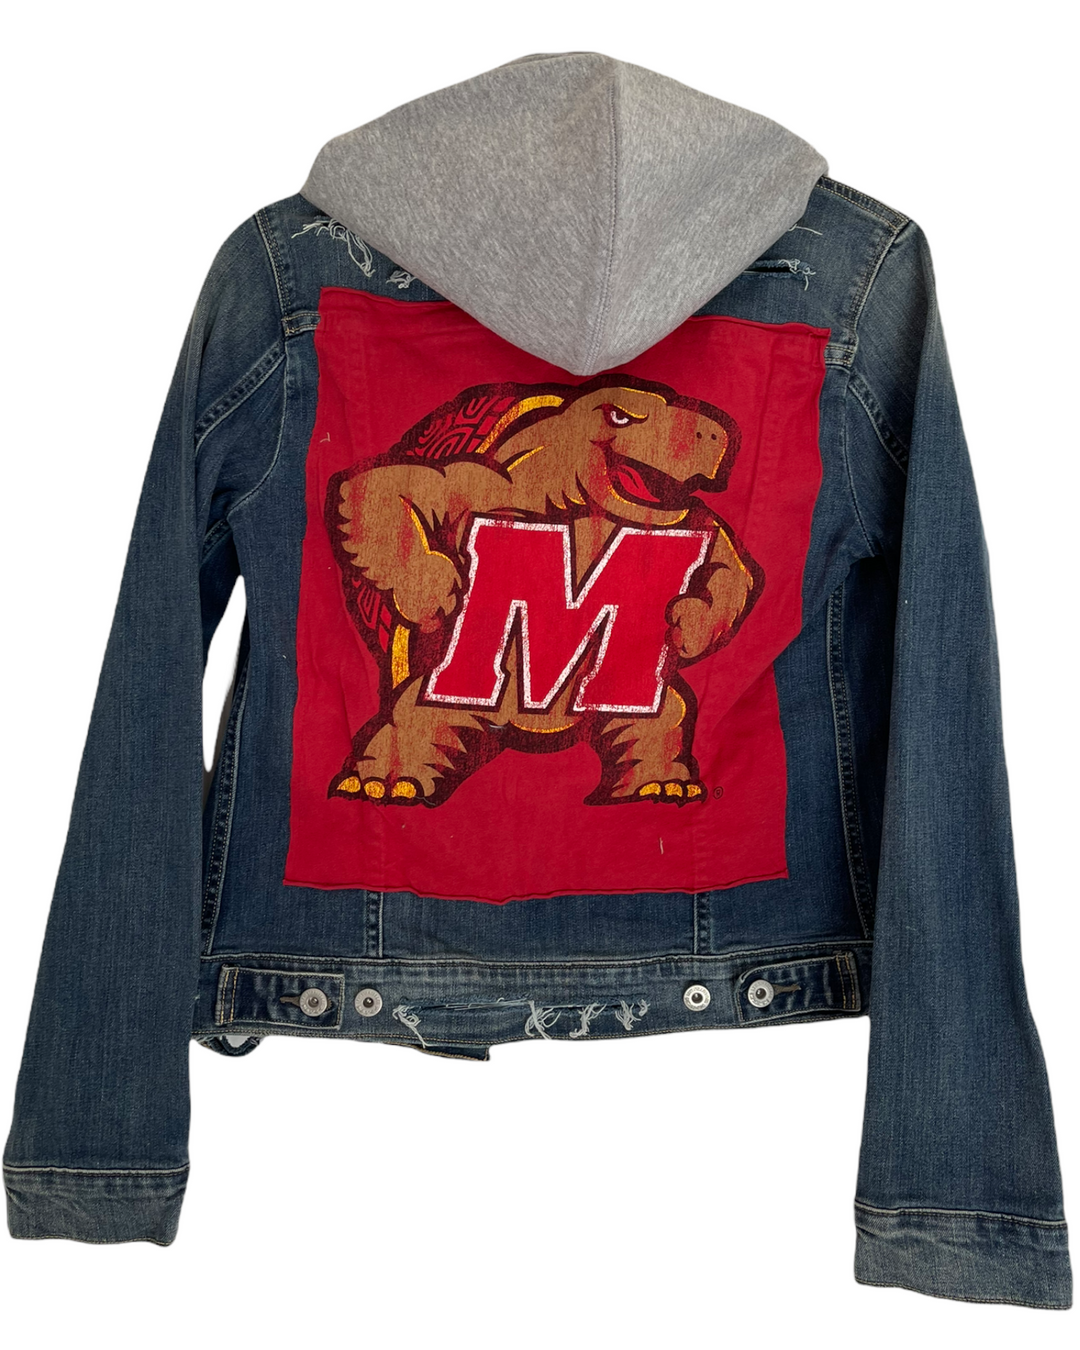 Maryland Patched Jean Jacket